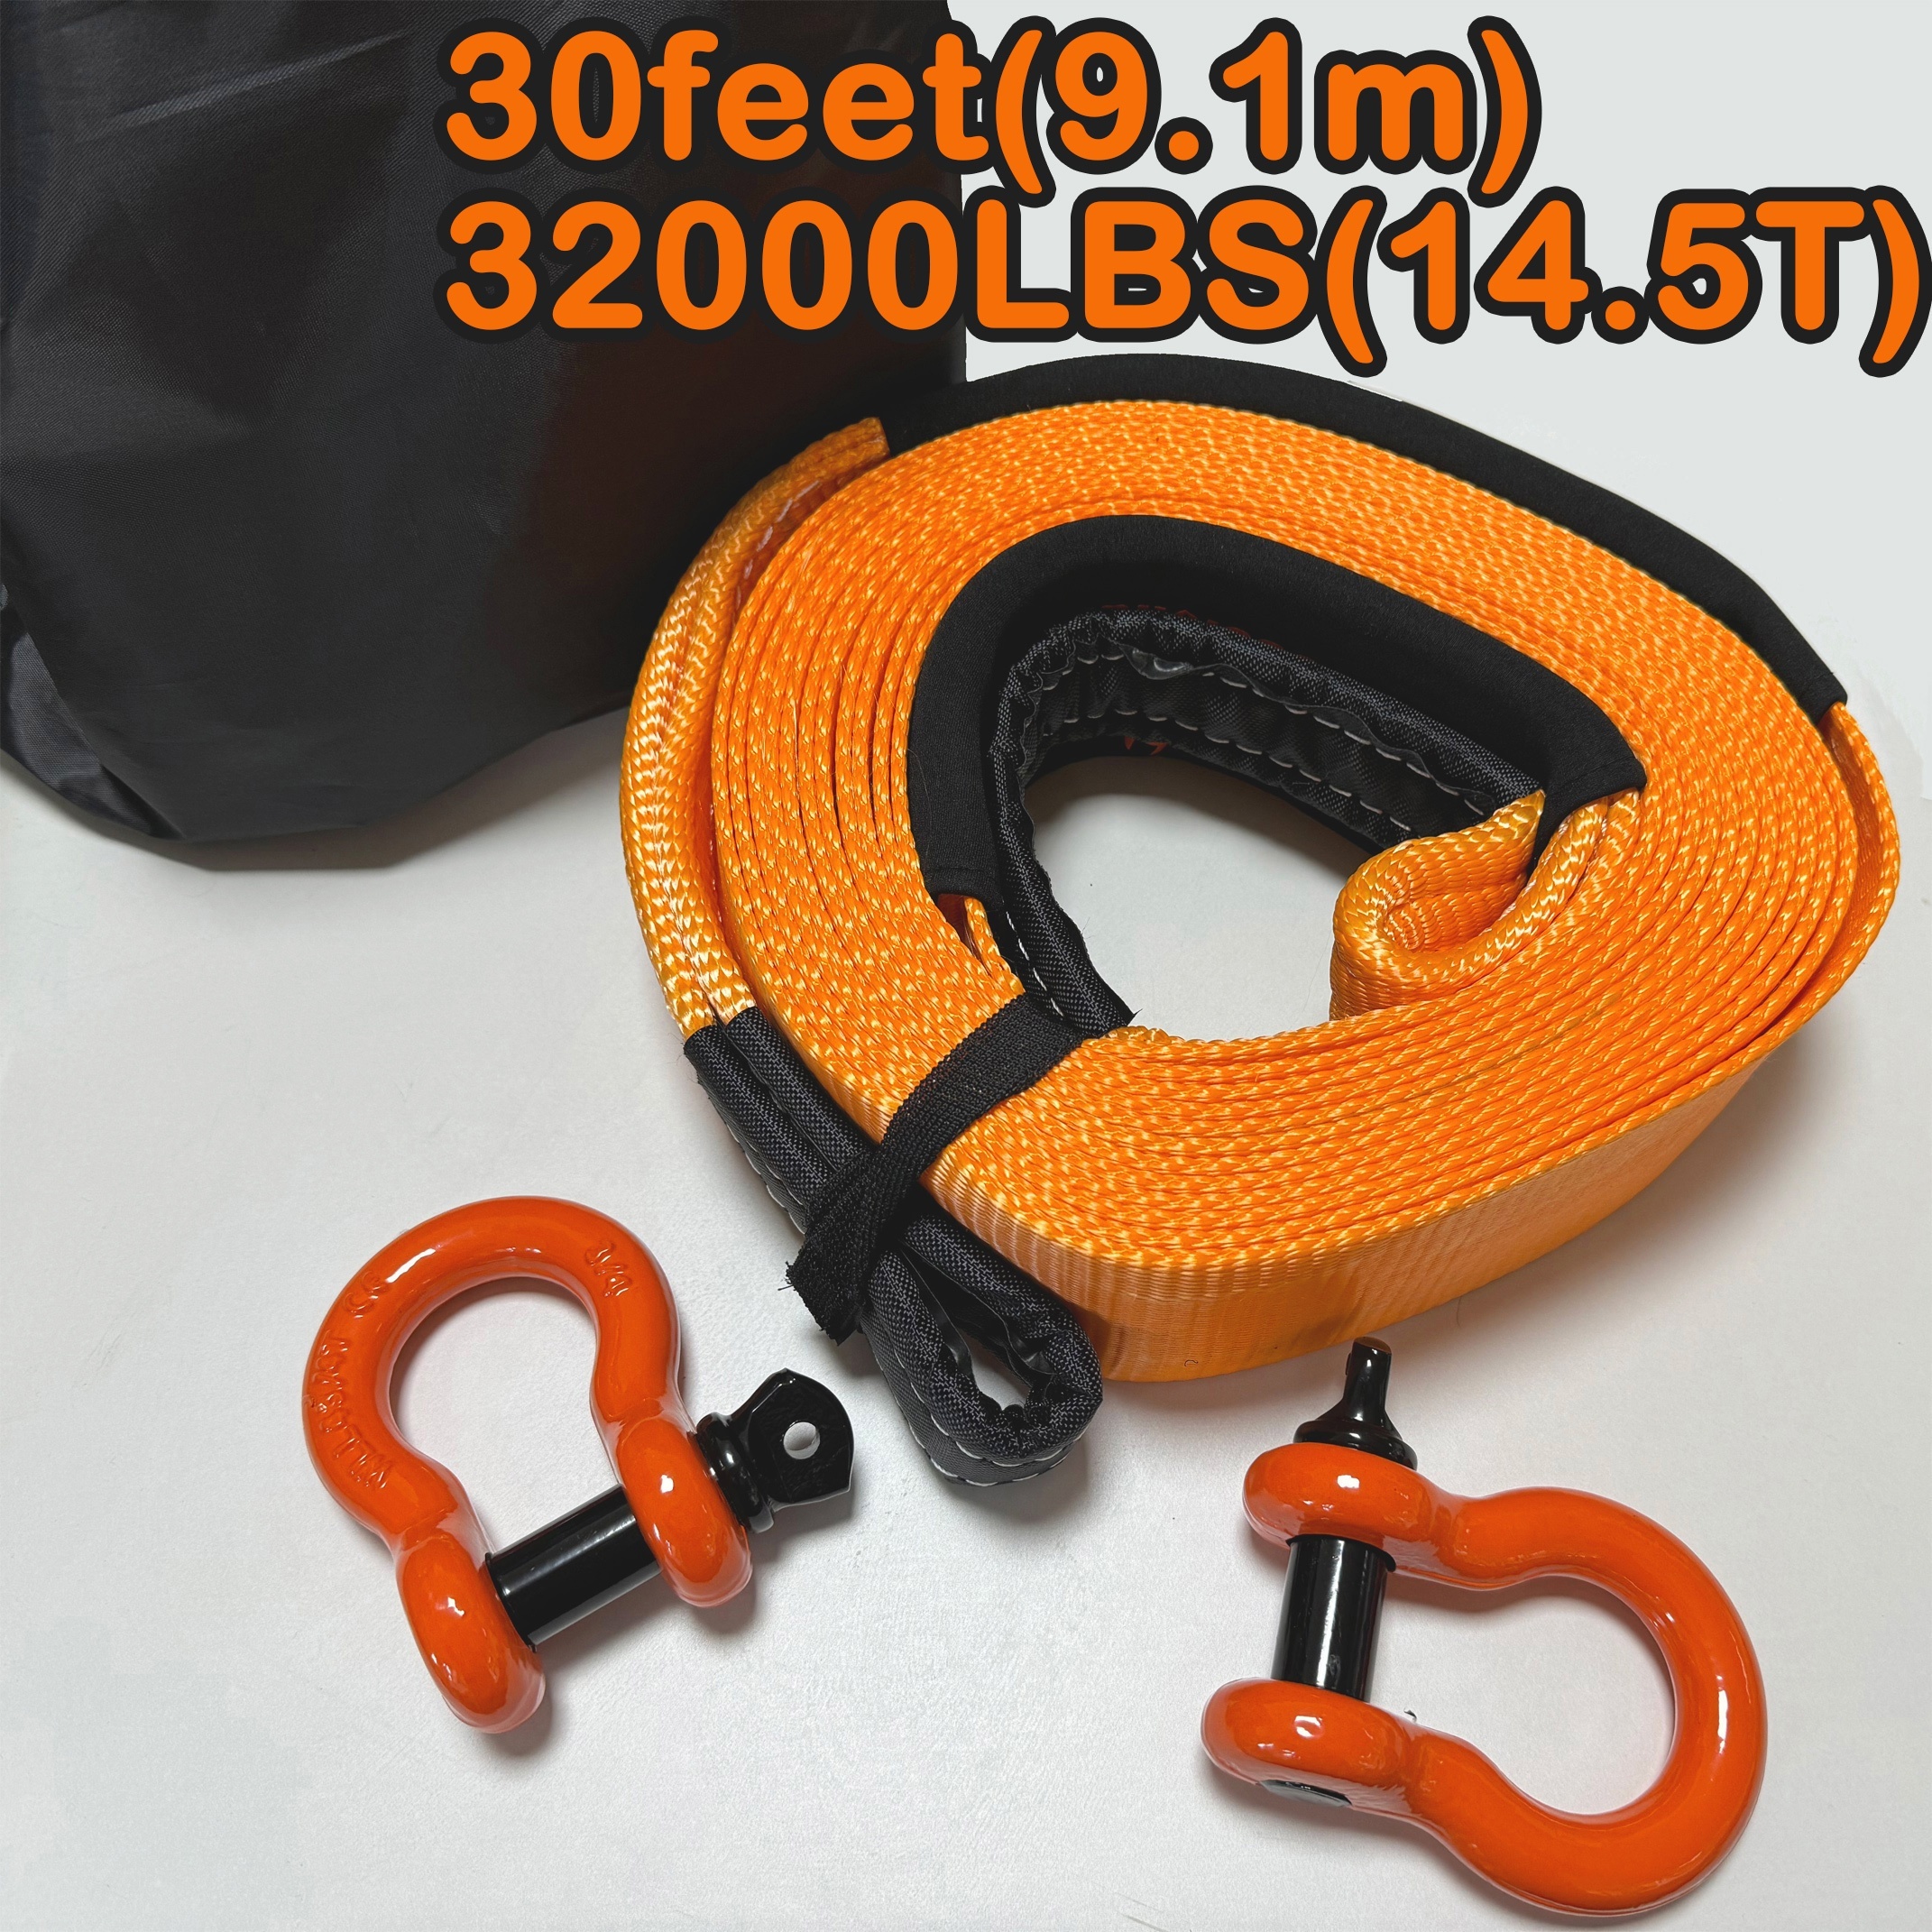 HORUSDY Nylon Heavy Duty Tow Strap Recovery Strap with Hooks 3 x 30Ft -  32,000 LBS Break Strength, 3/4 D Ring Shackles (2pcs), Recover Your Vehicle